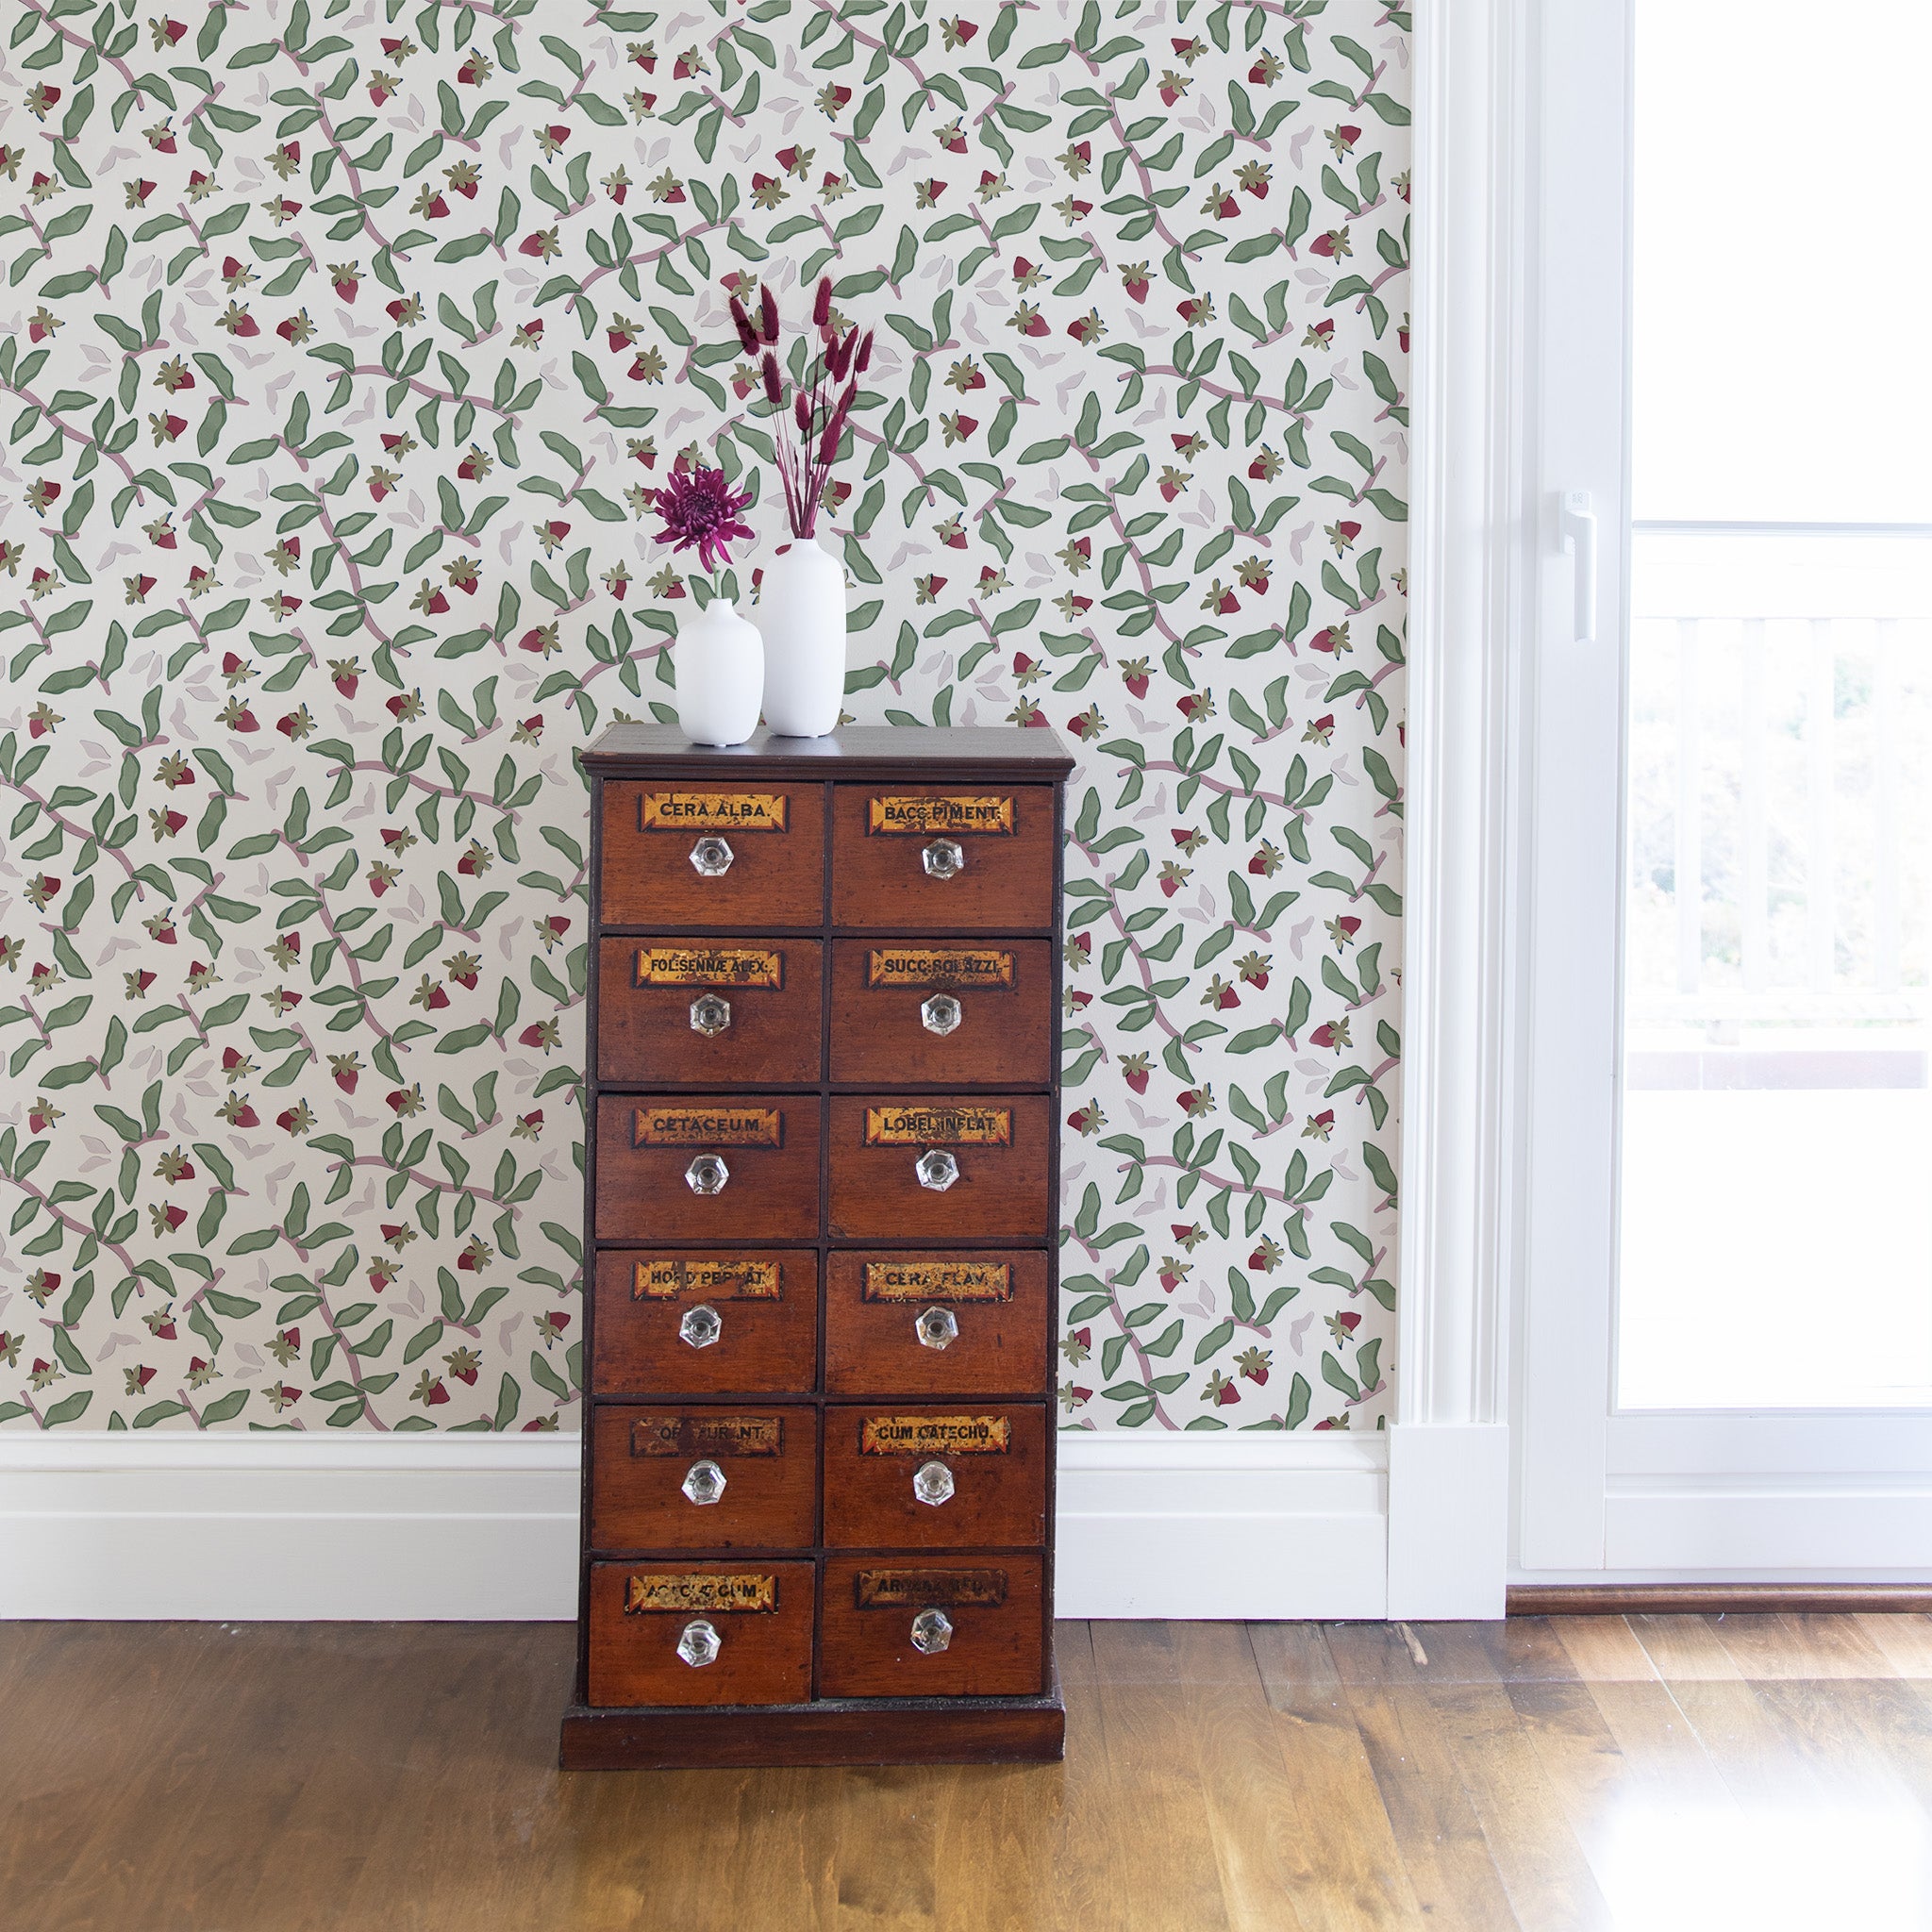 Strawberry & Botanical Printed Wallpaper with wooden cabinet in front and pink flowers on two white vases on top next to illuminated window